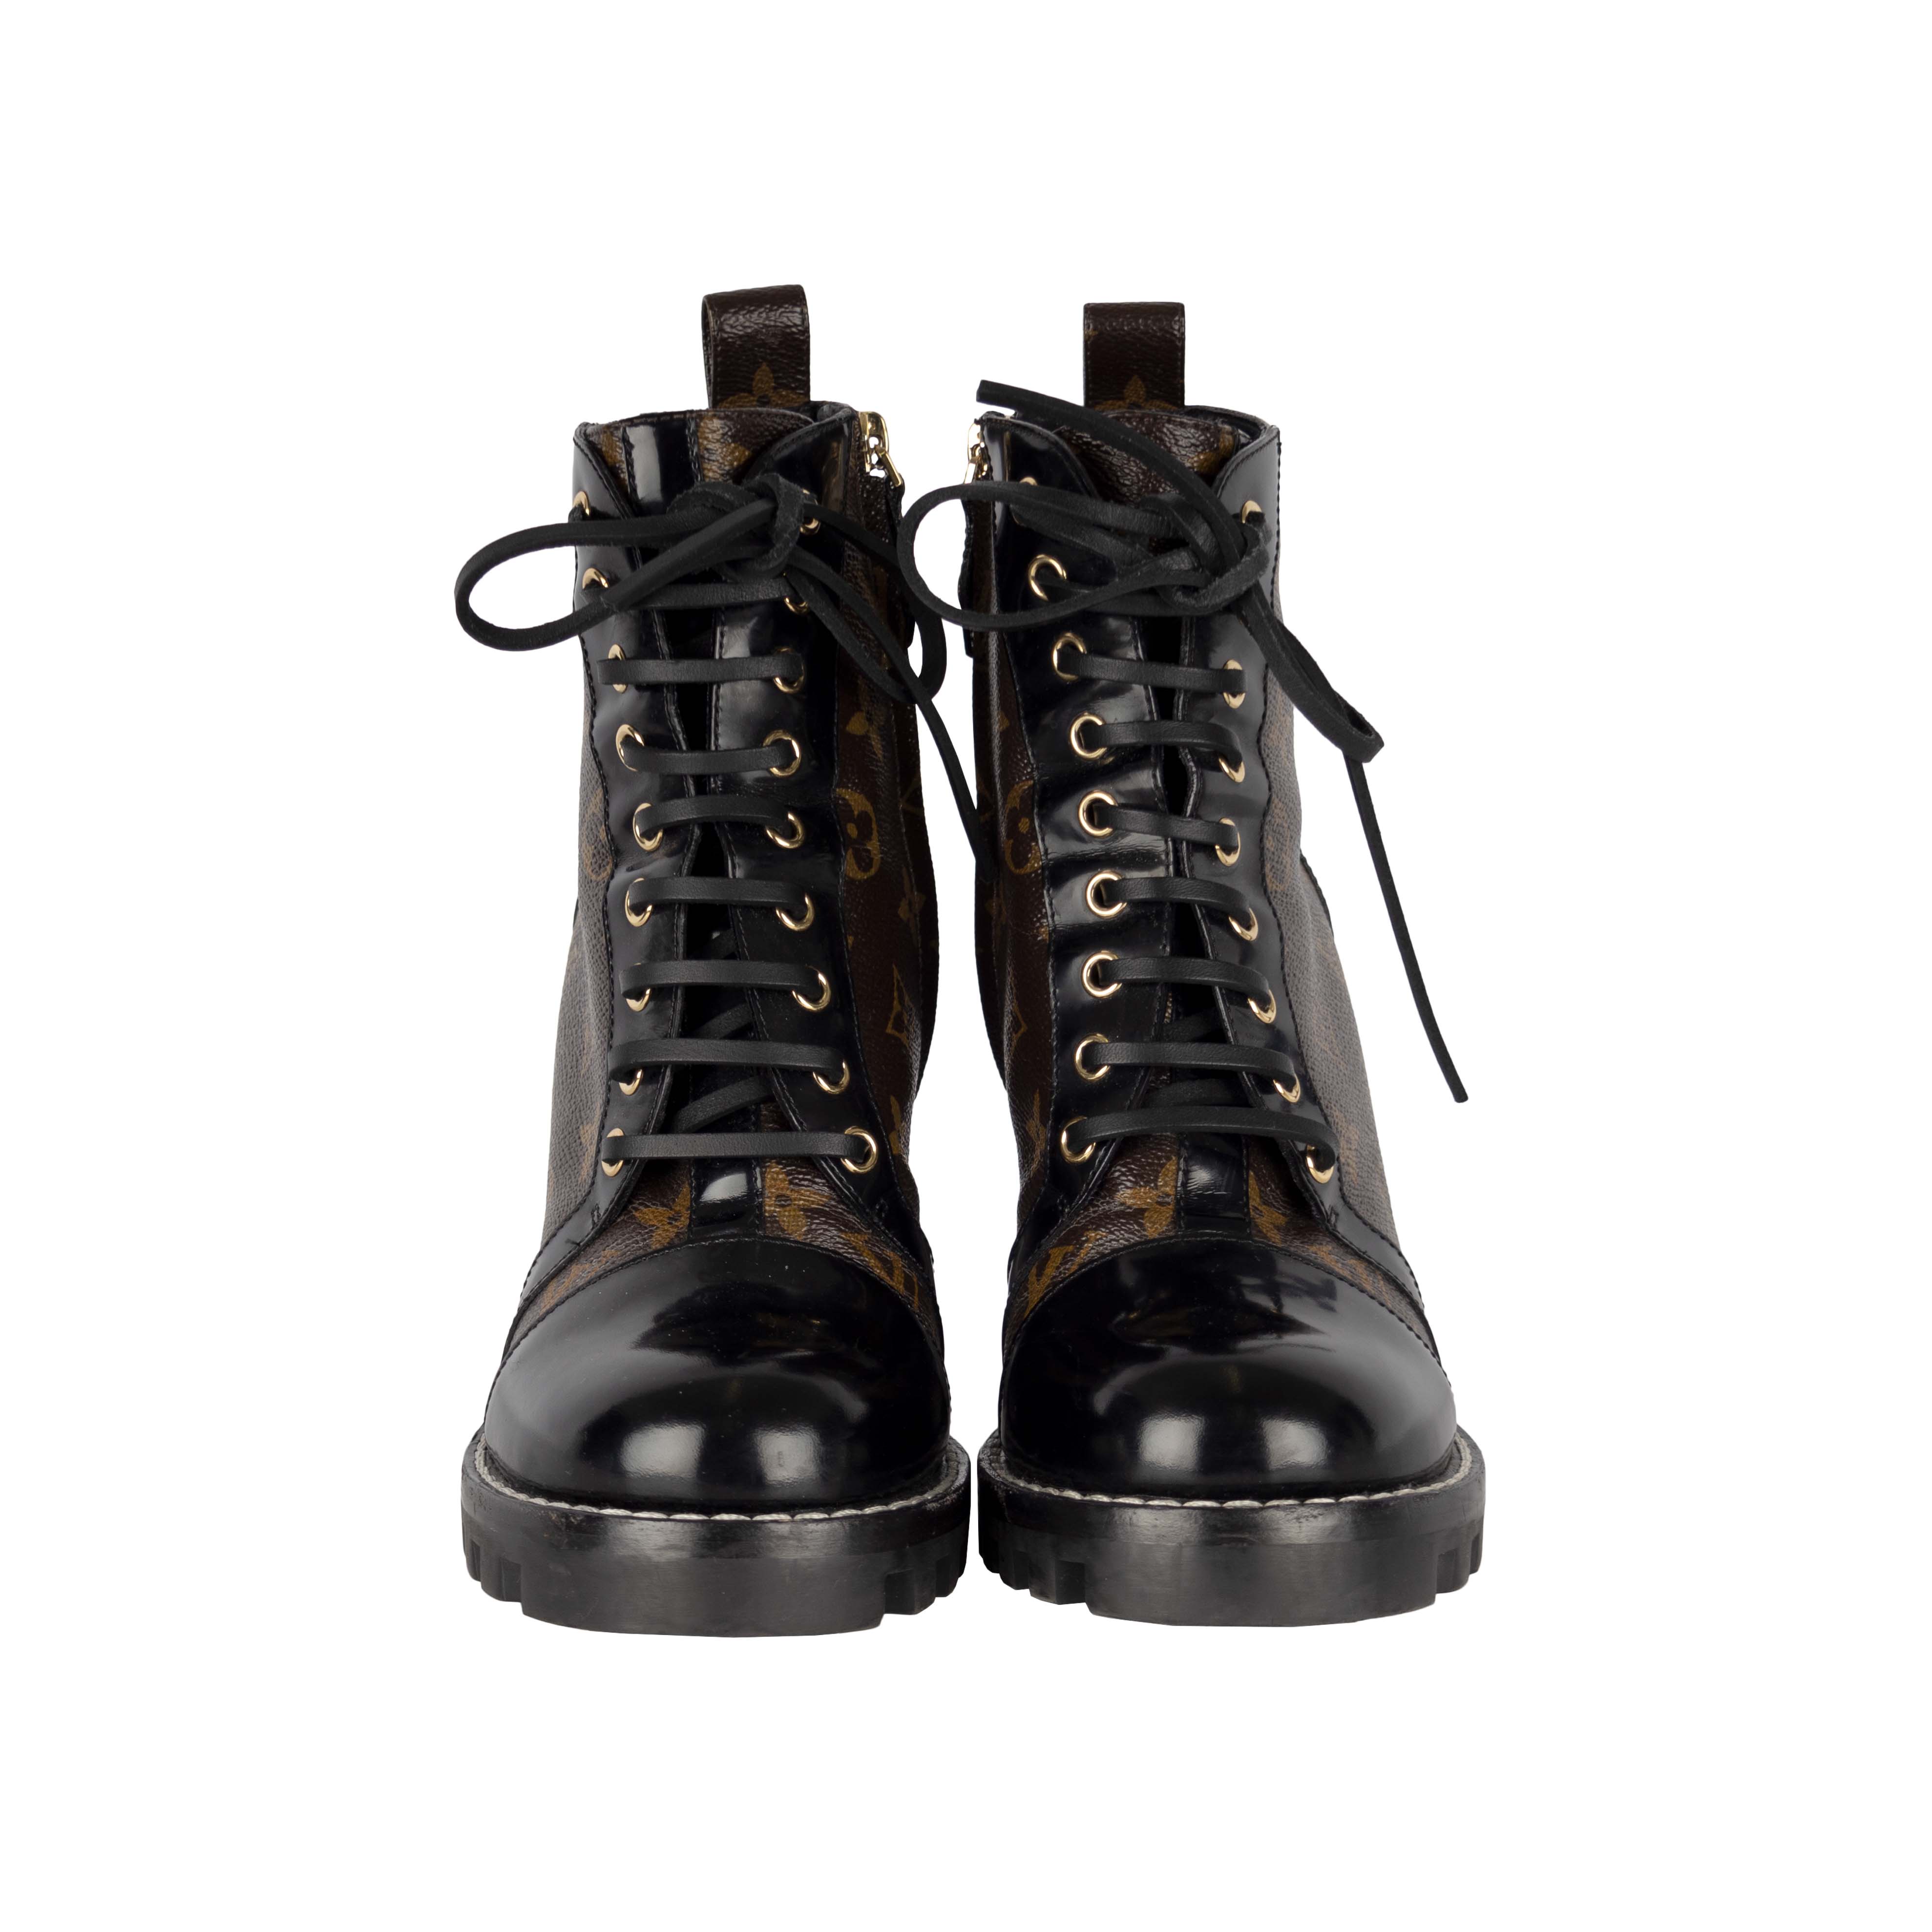 Star trail leather lace up boots Louis Vuitton Brown size 39 EU in